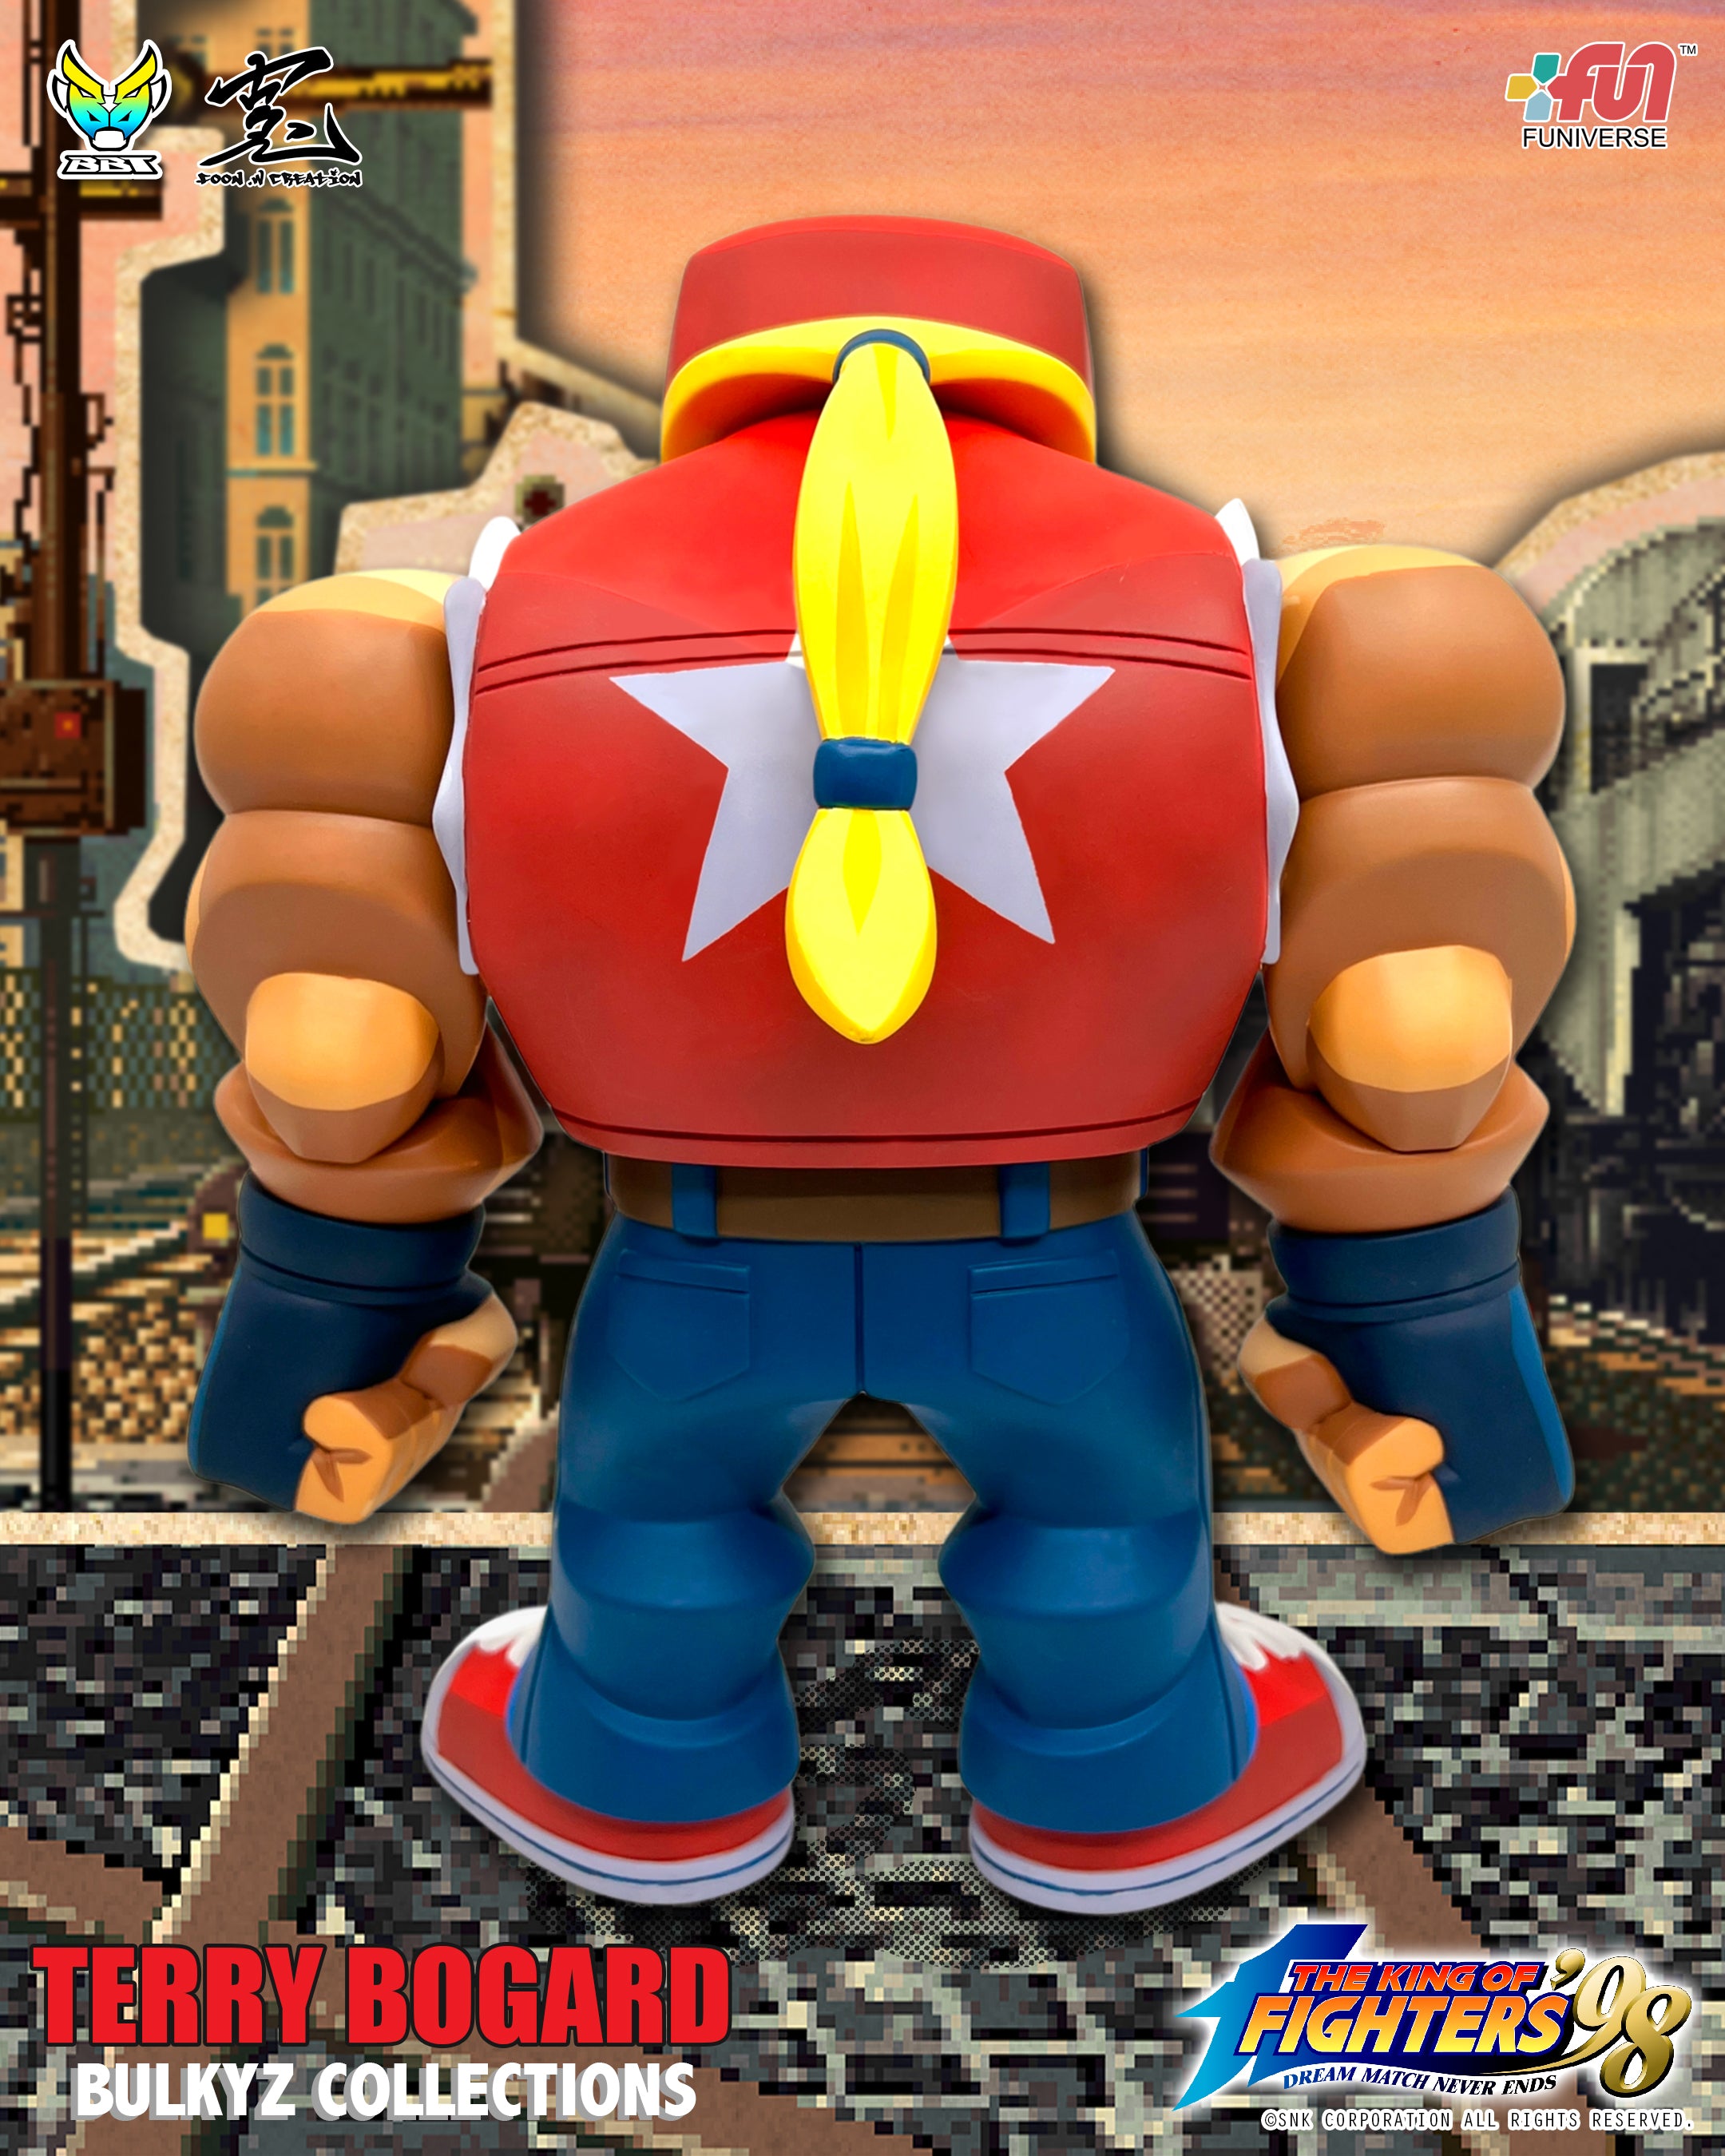 The King Of Fighters 98 Bulkyz Collections – Terry Bogard - Preorder